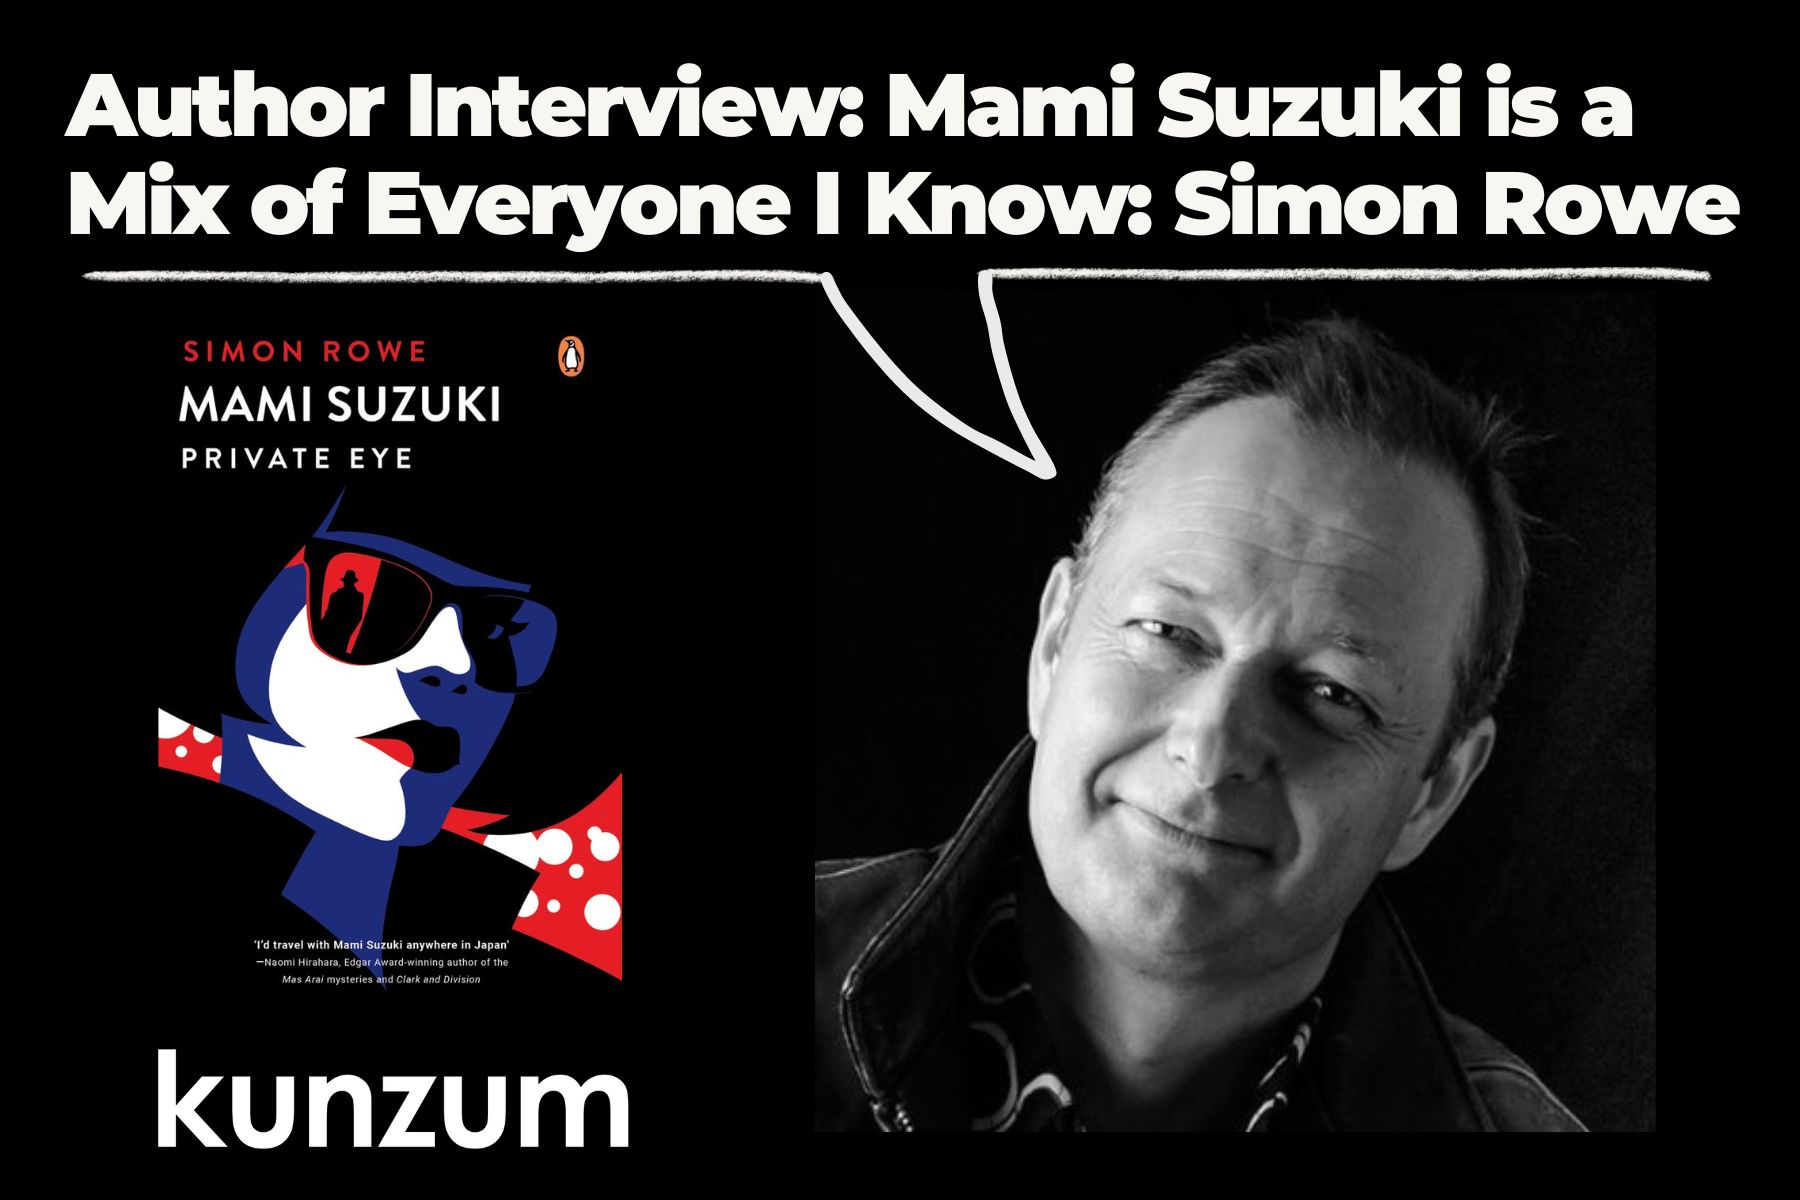 Author Interview: Mami Suzuki is a Composite of Everyone I Have Met or Know, Says Simon Rowe